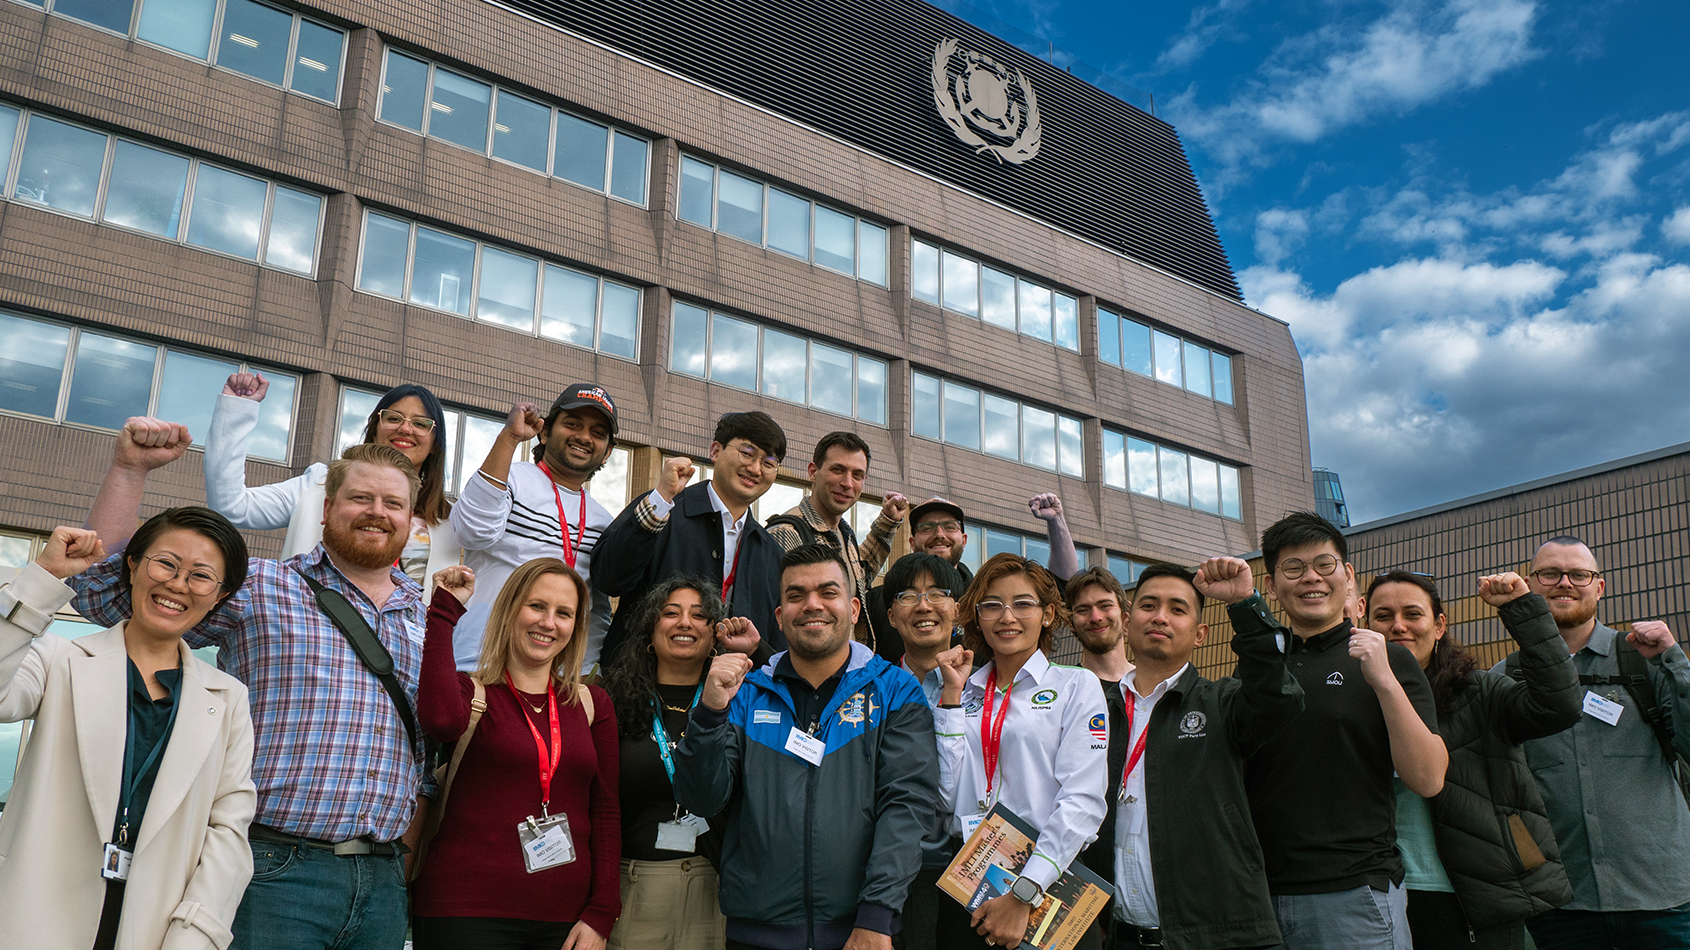 Young seafarers, part of the ITF Seafarers’ Section’s Young Seafarers Network on a recent visit to the IMO headquarters in London. Young seafarers want action on climate change and a worker-led Just Transition that leaves no one behind. (Credit: ITF)